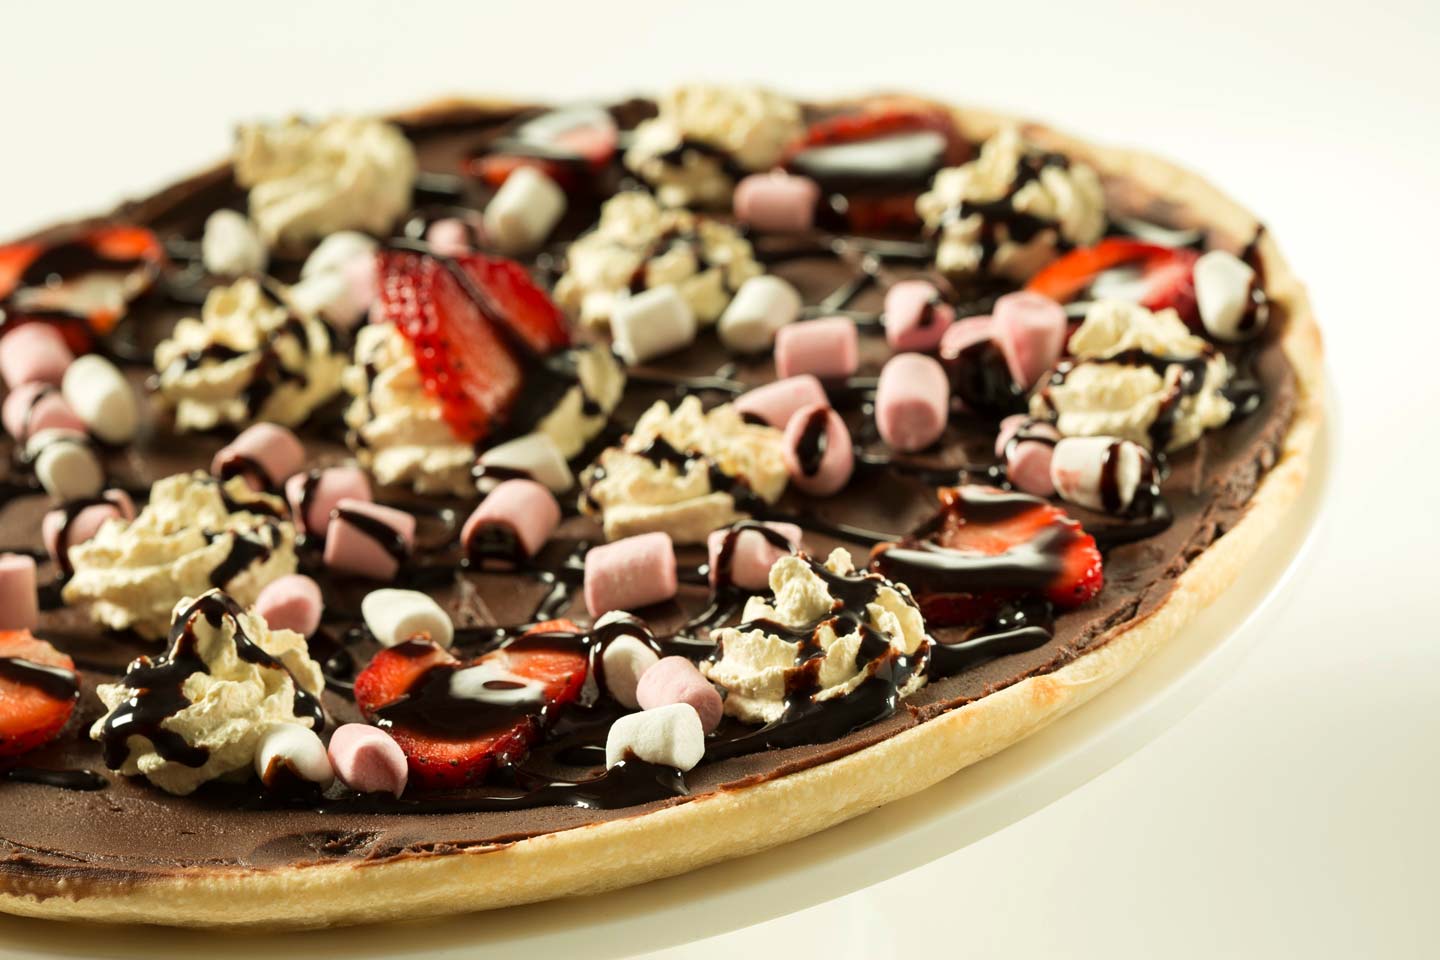 🍪 Only a True Chocoholic Will Have Eaten at Least 13/25 of These Treats Chocolate pizza